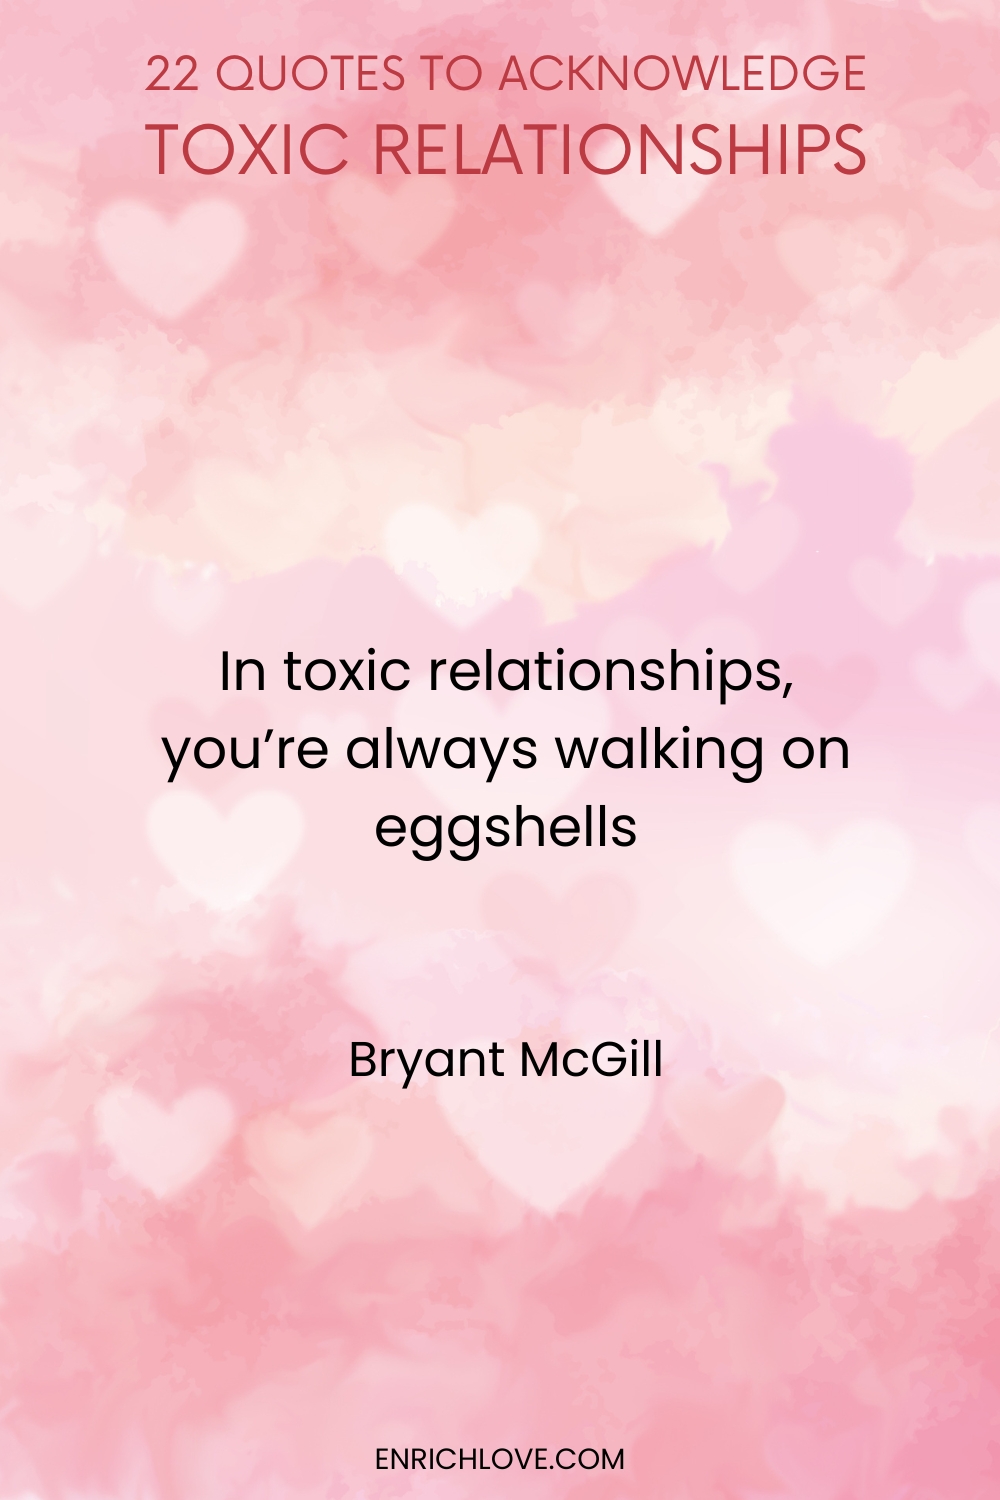 22 Quotes to Acknowledge Toxic Relationships -In toxic relationships, you're always walking on eggshells by Bryant McGill